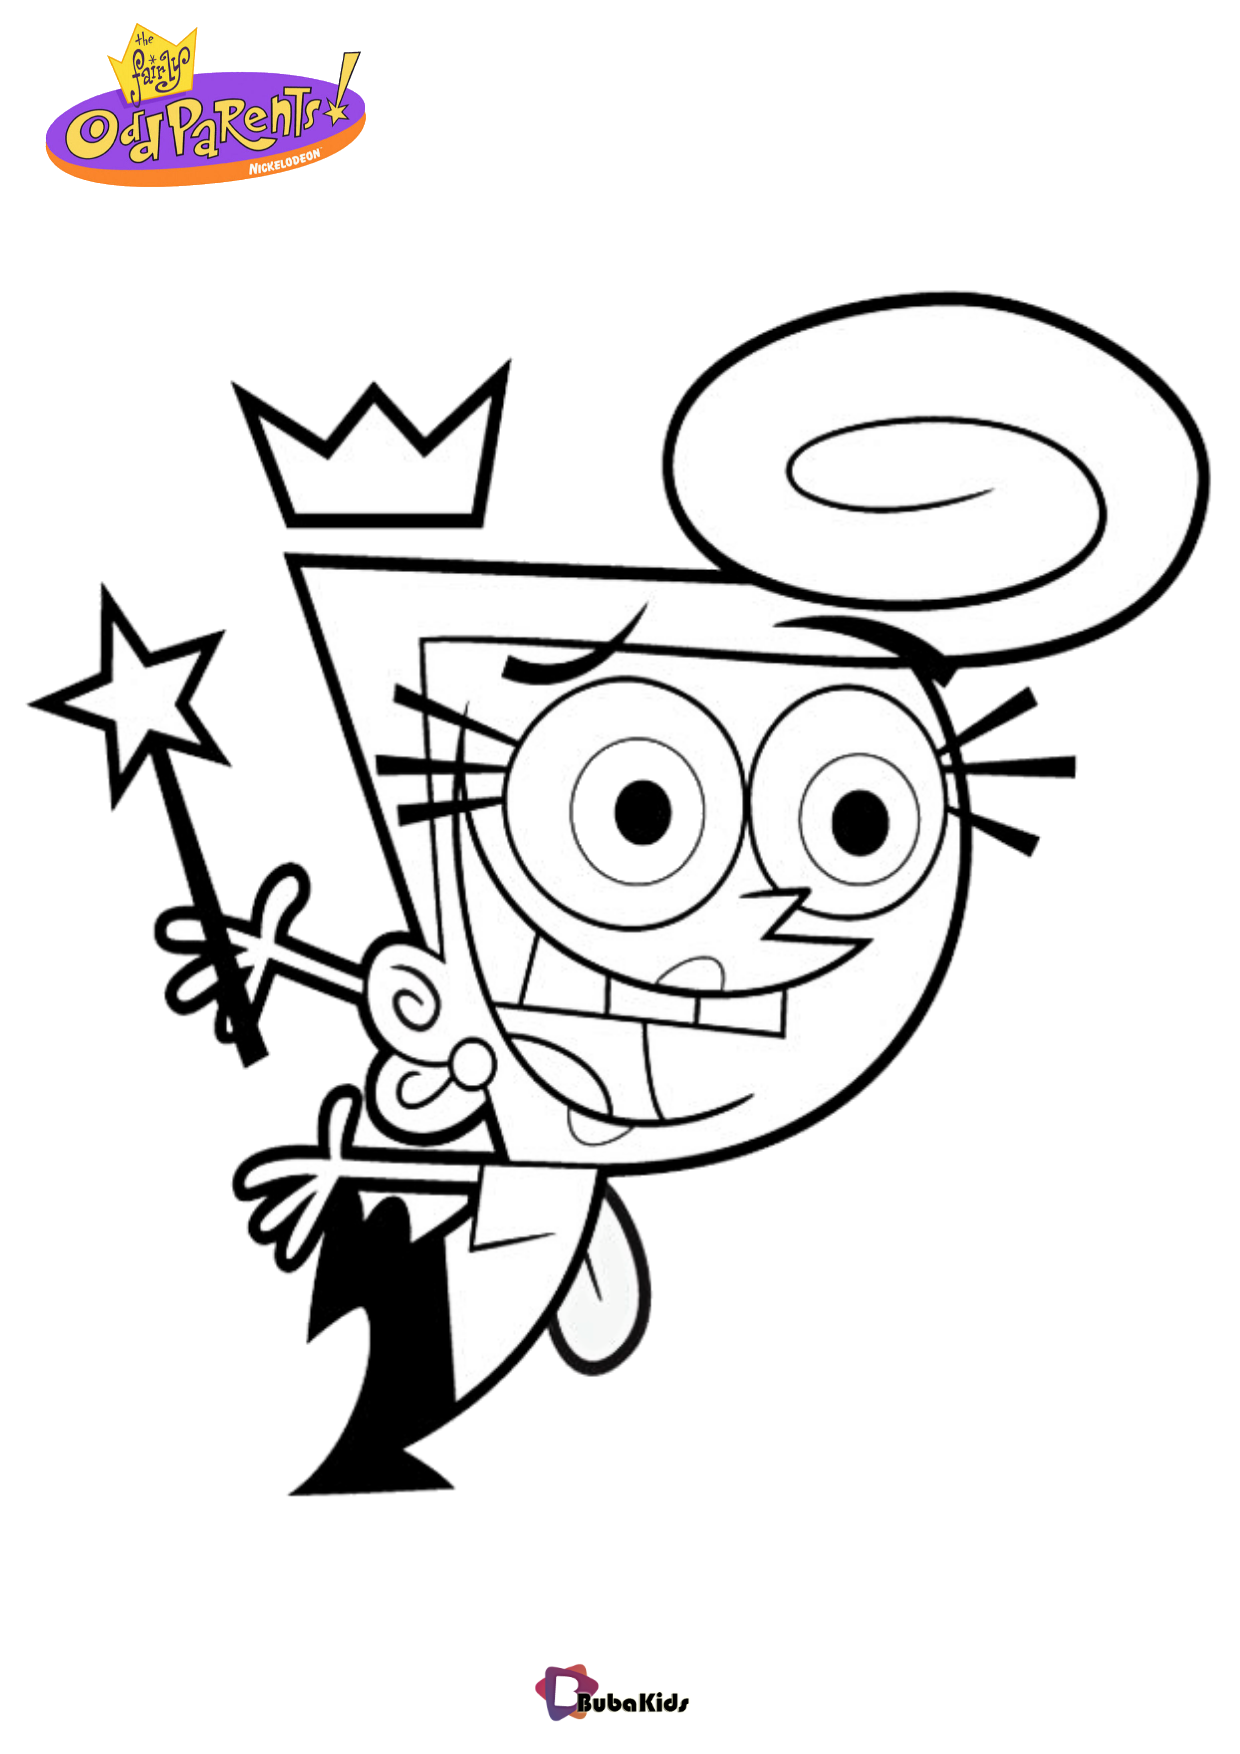 Fairly Oddparents Nickelodeon tv series coloring page Wallpaper